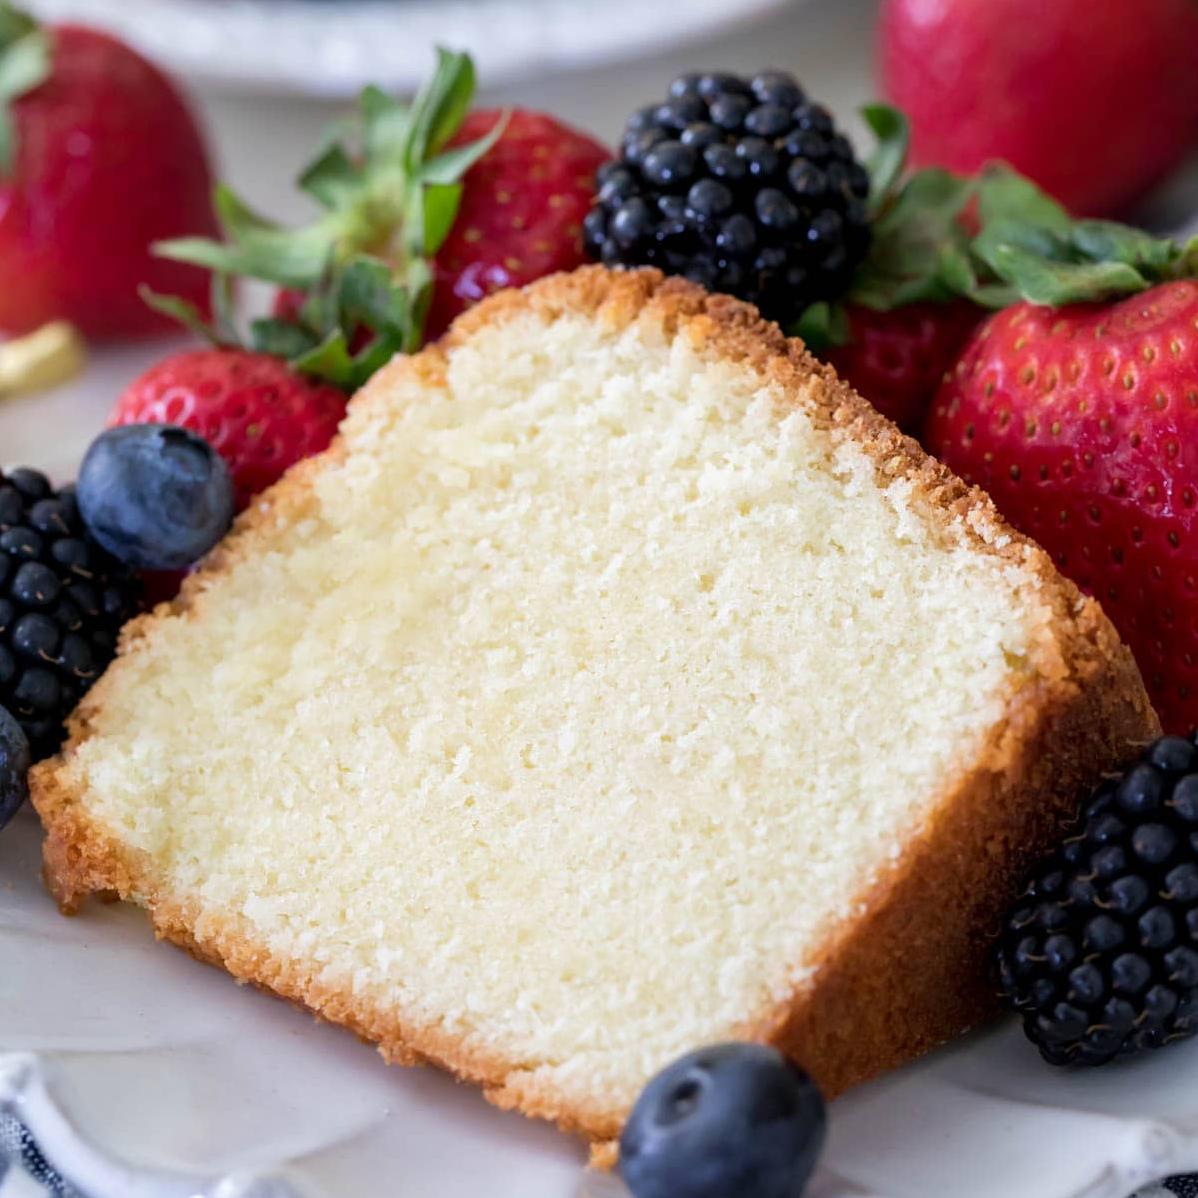  Timeless classic: Traditional Pound Cake